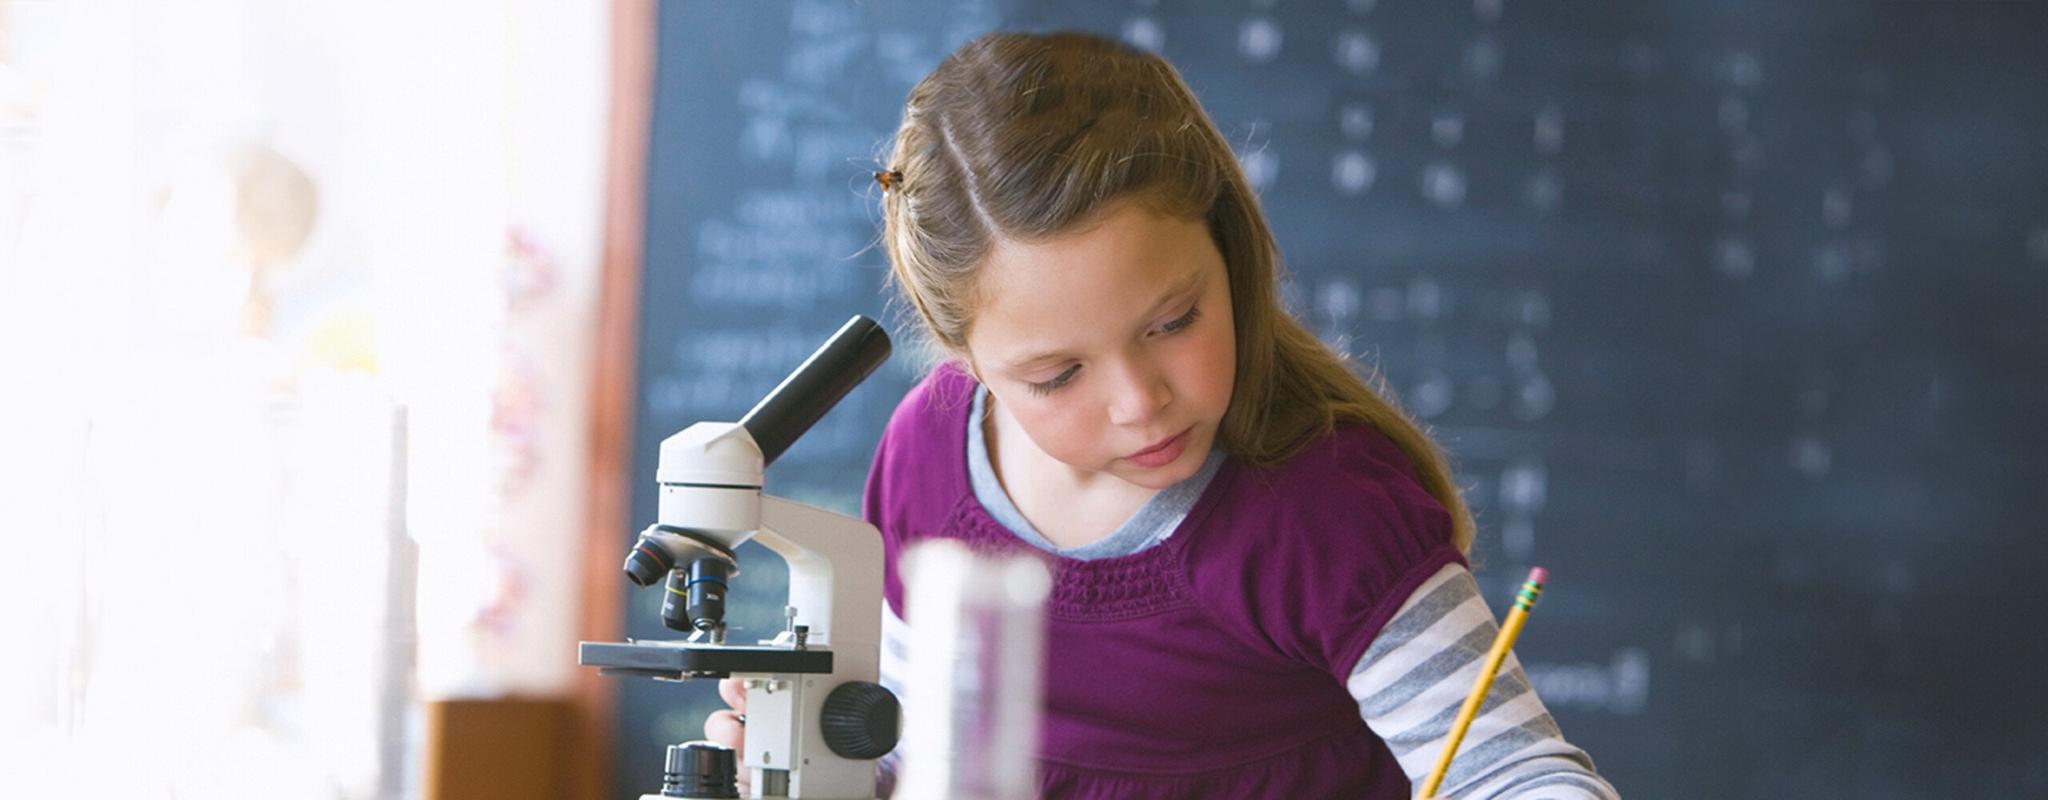 Girl looking into classroom microscope (Image © Blend Images - KidStock/Getty Images)